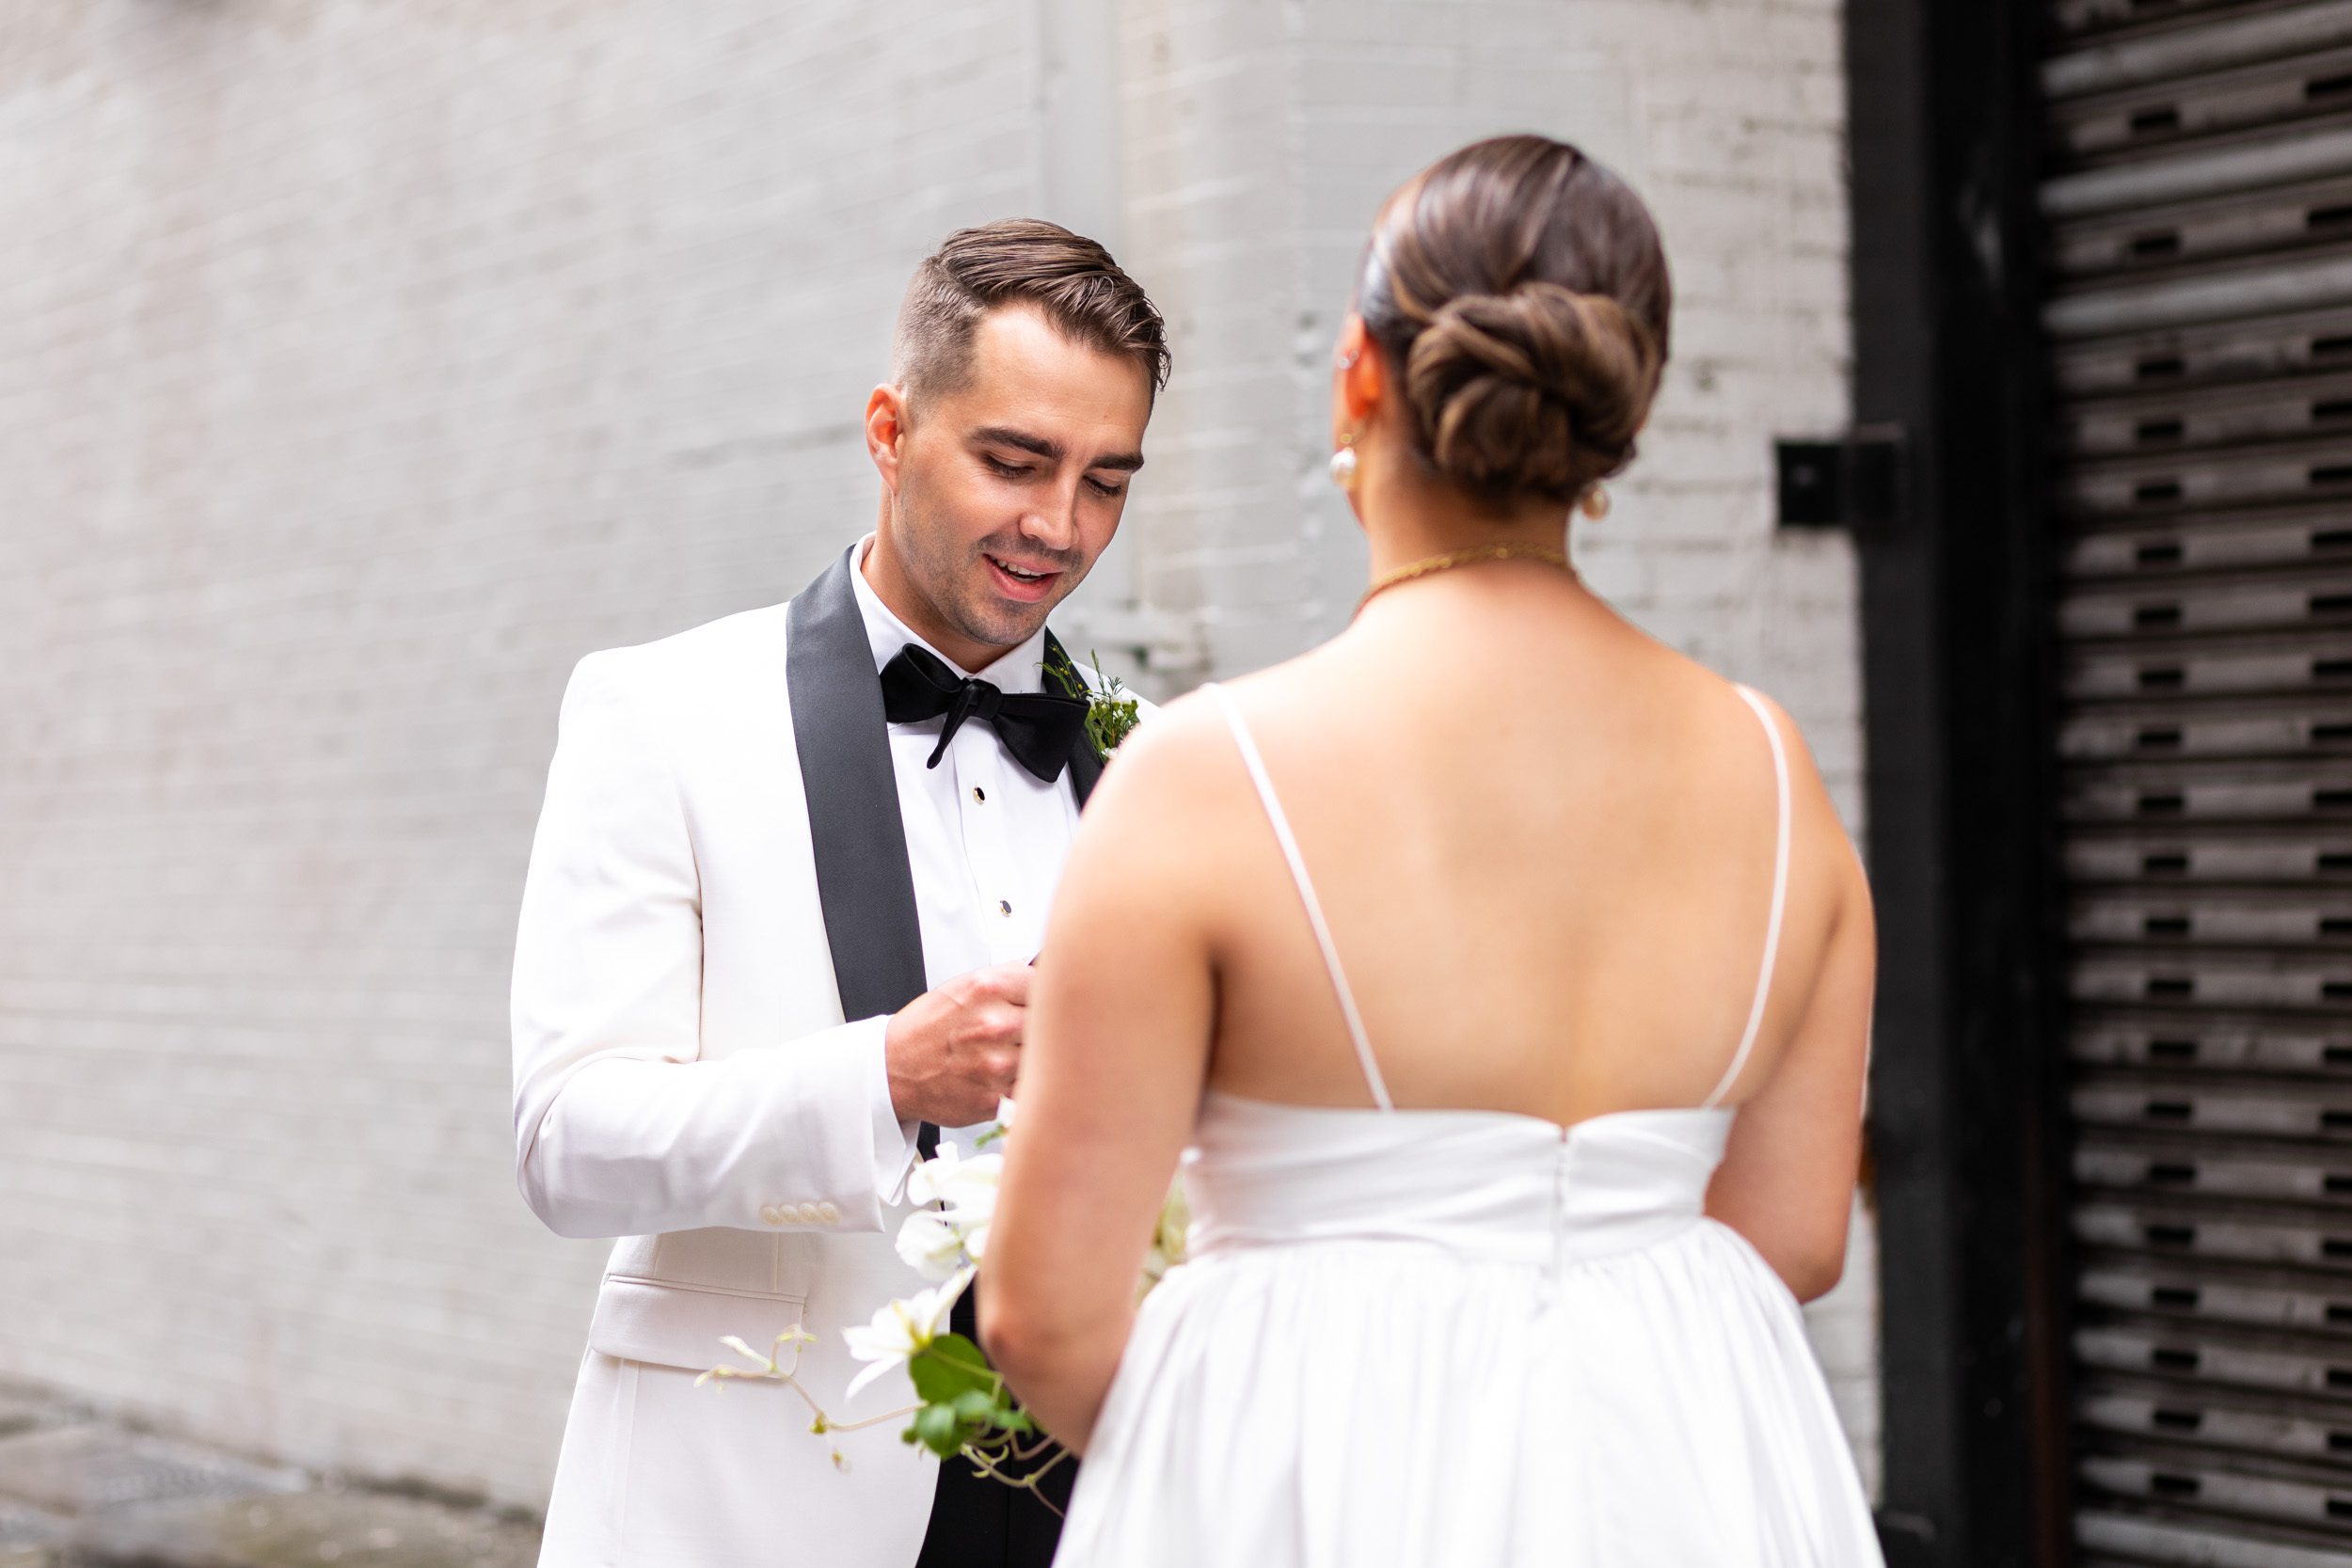 Bride and groom, during first look and private vows in elegant black tie, wedding outside of the Alexis Hotel